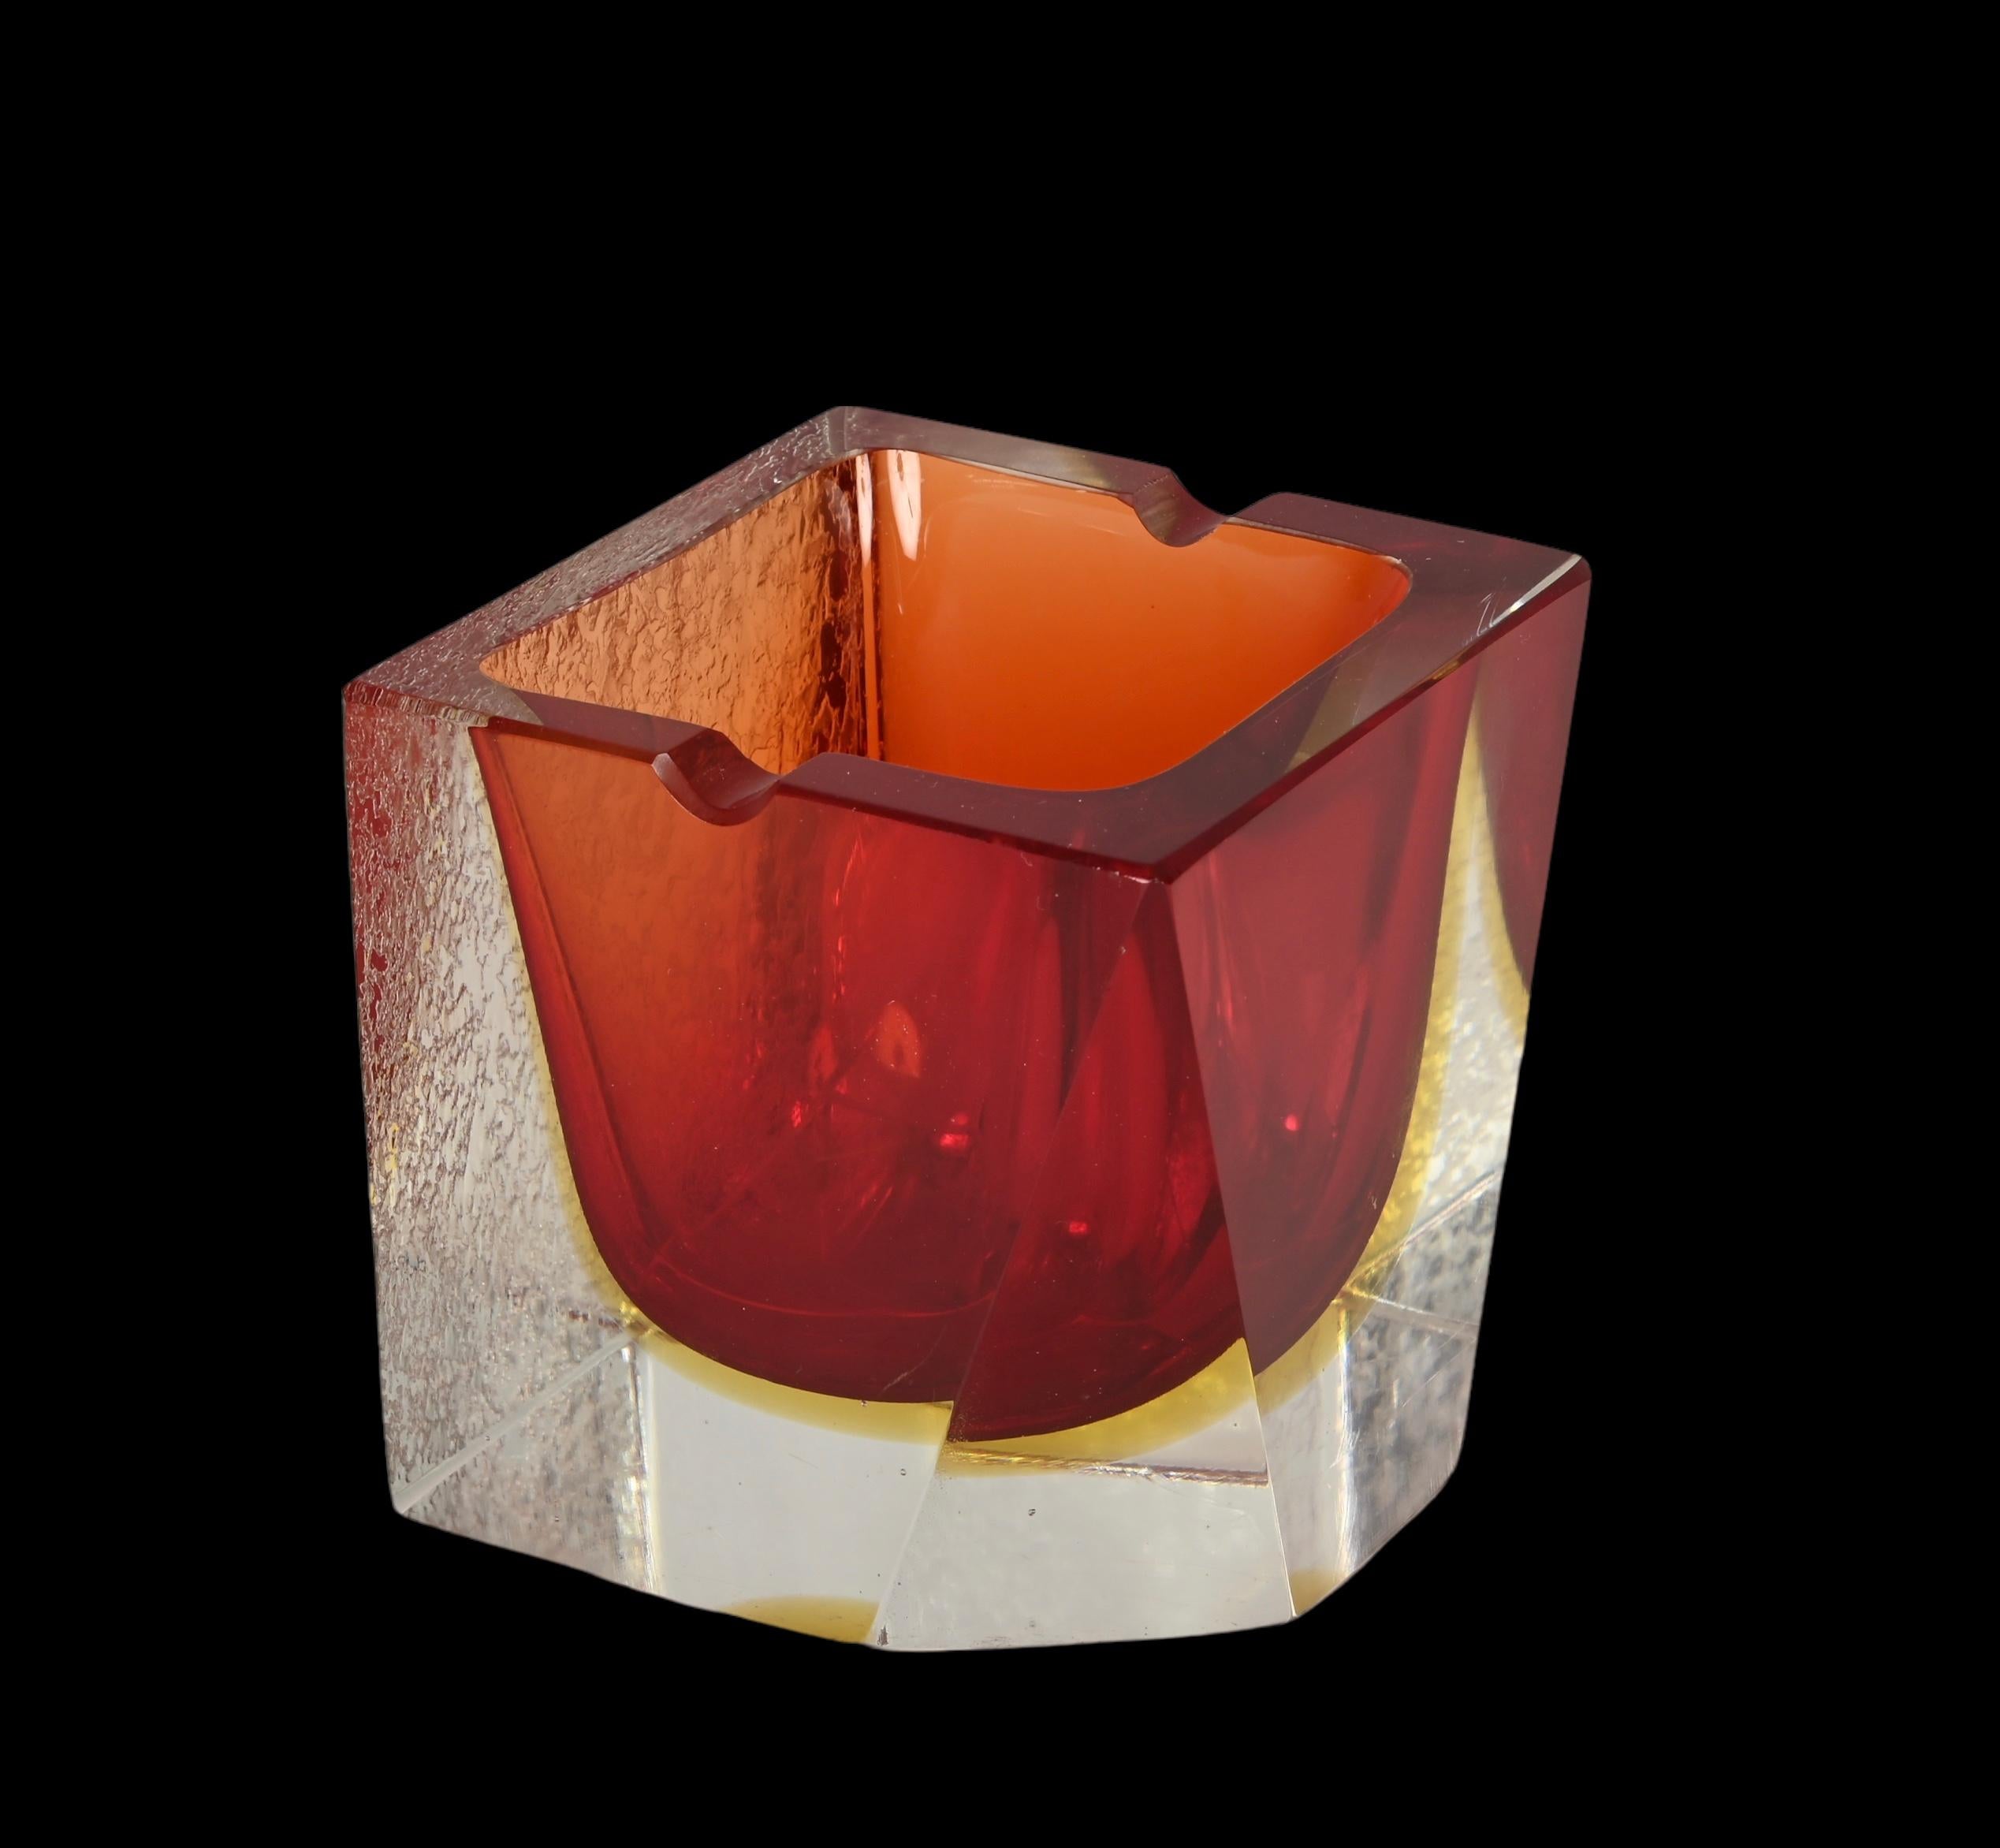 Amazing mid-century frosted Murano crystal glass ashtray. This fantastic piece was designed in Italy, Murano Venice, in the 70s and is attributed to Mandruzzato.

This item is wonderful for the purity of the Murano crystal and for the perfection